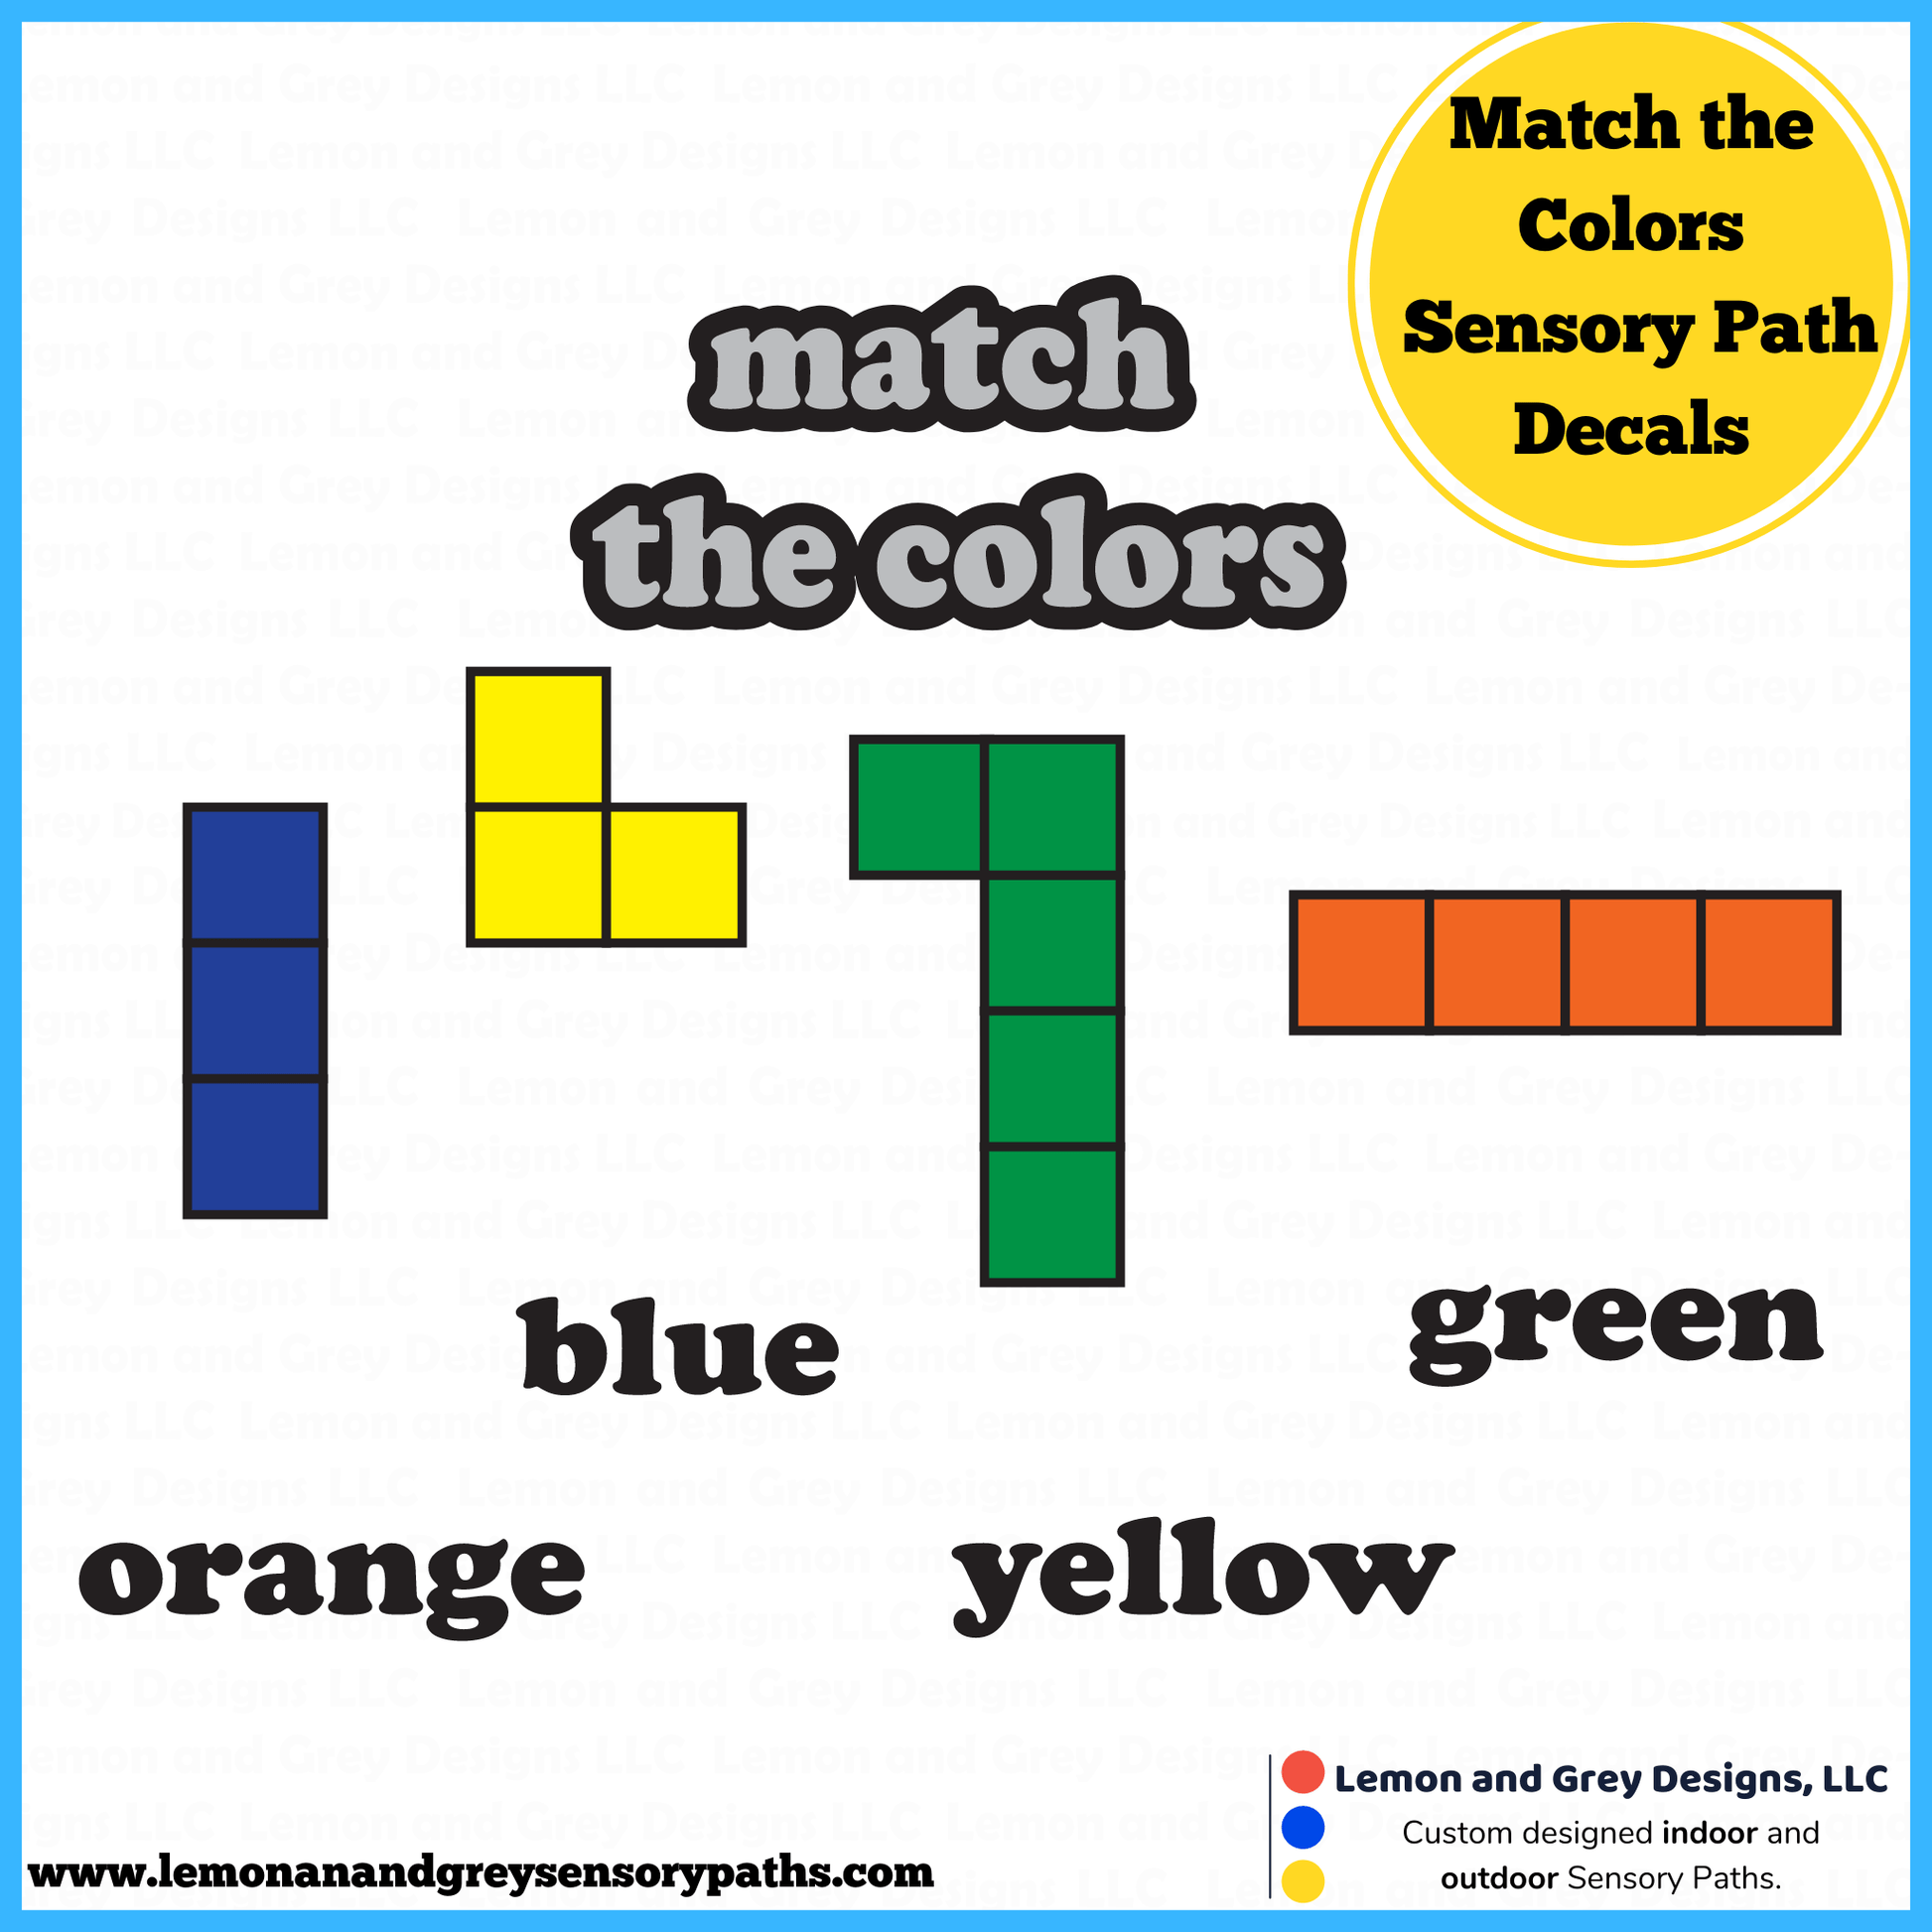 Match the Colors Sensory Path Decals